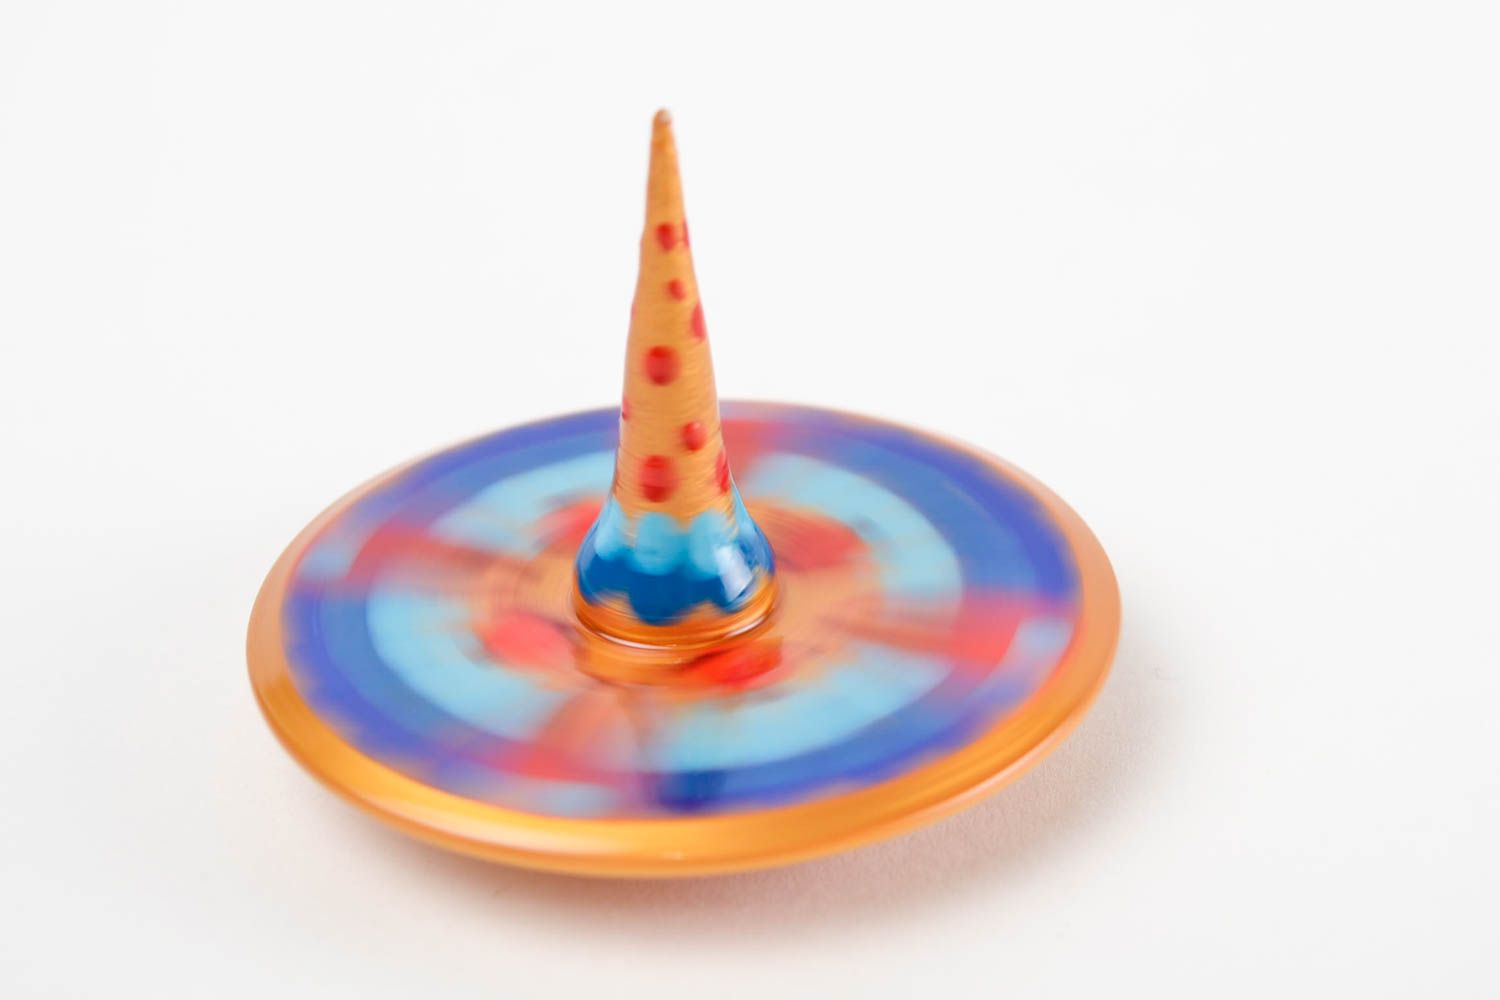 Beautiful handmade wooden spinning top smart toy spin top birthday gift ideas photo 2